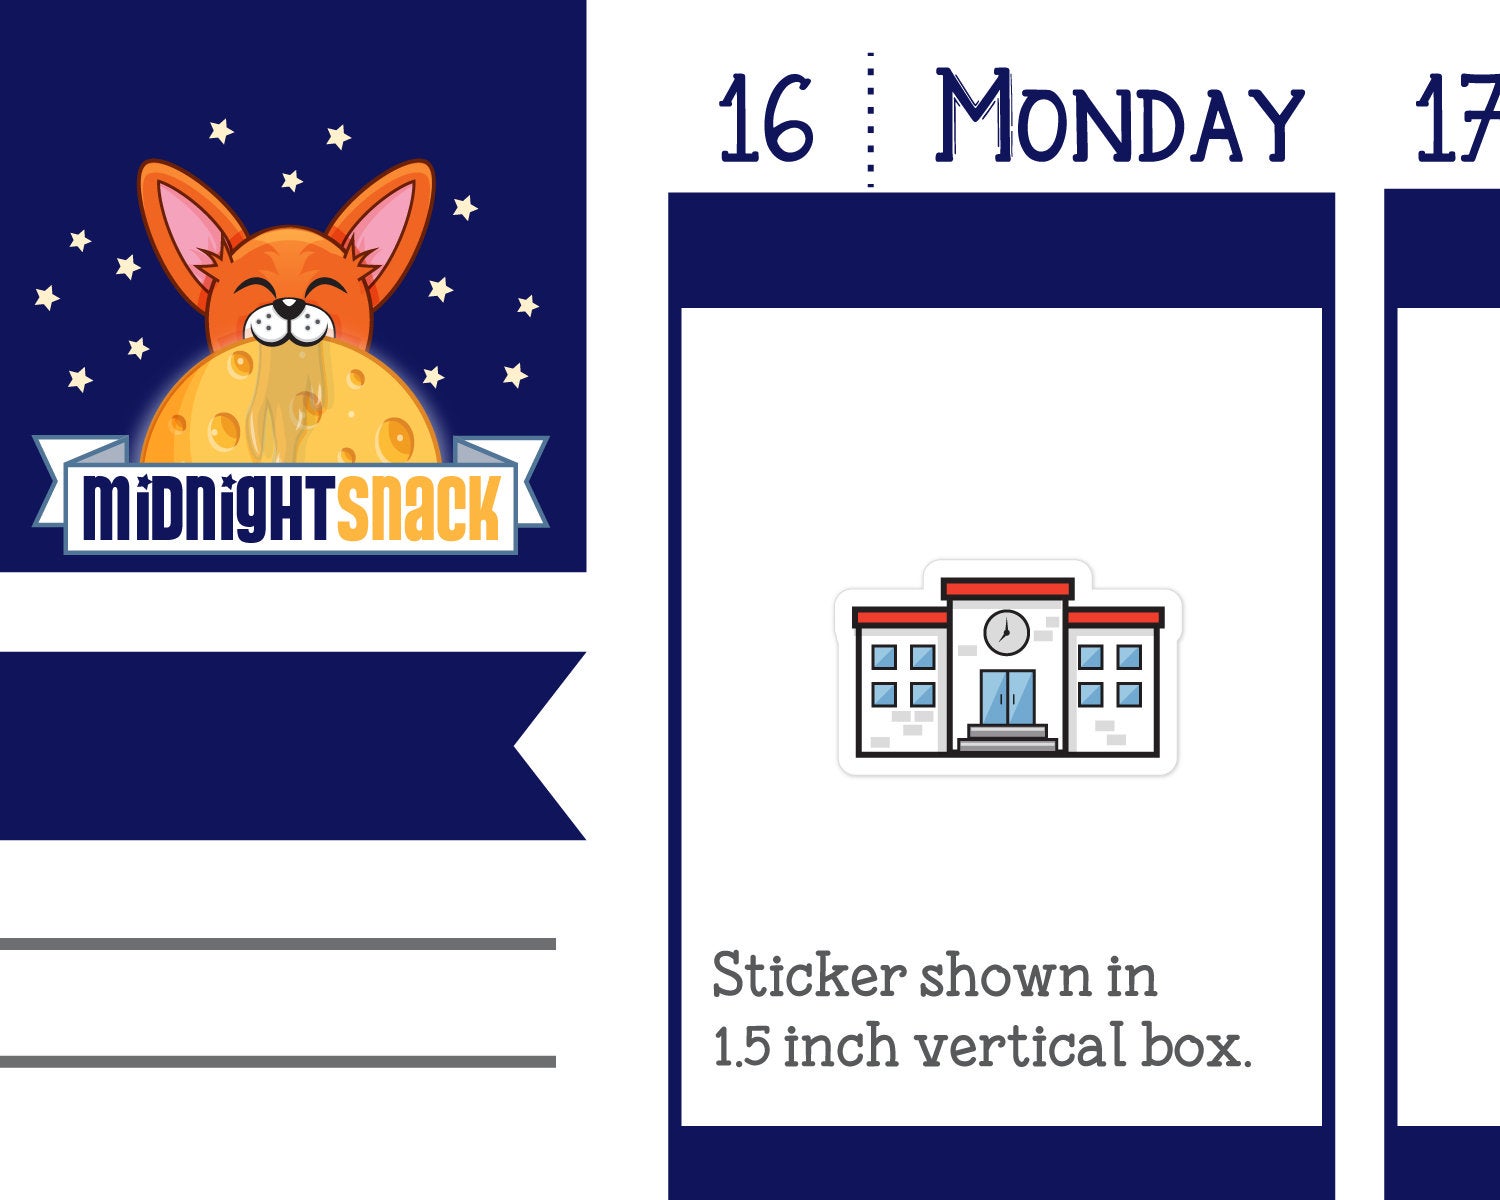 School Building Icon: Back to School Planner Stickers Midnight Snack Planner